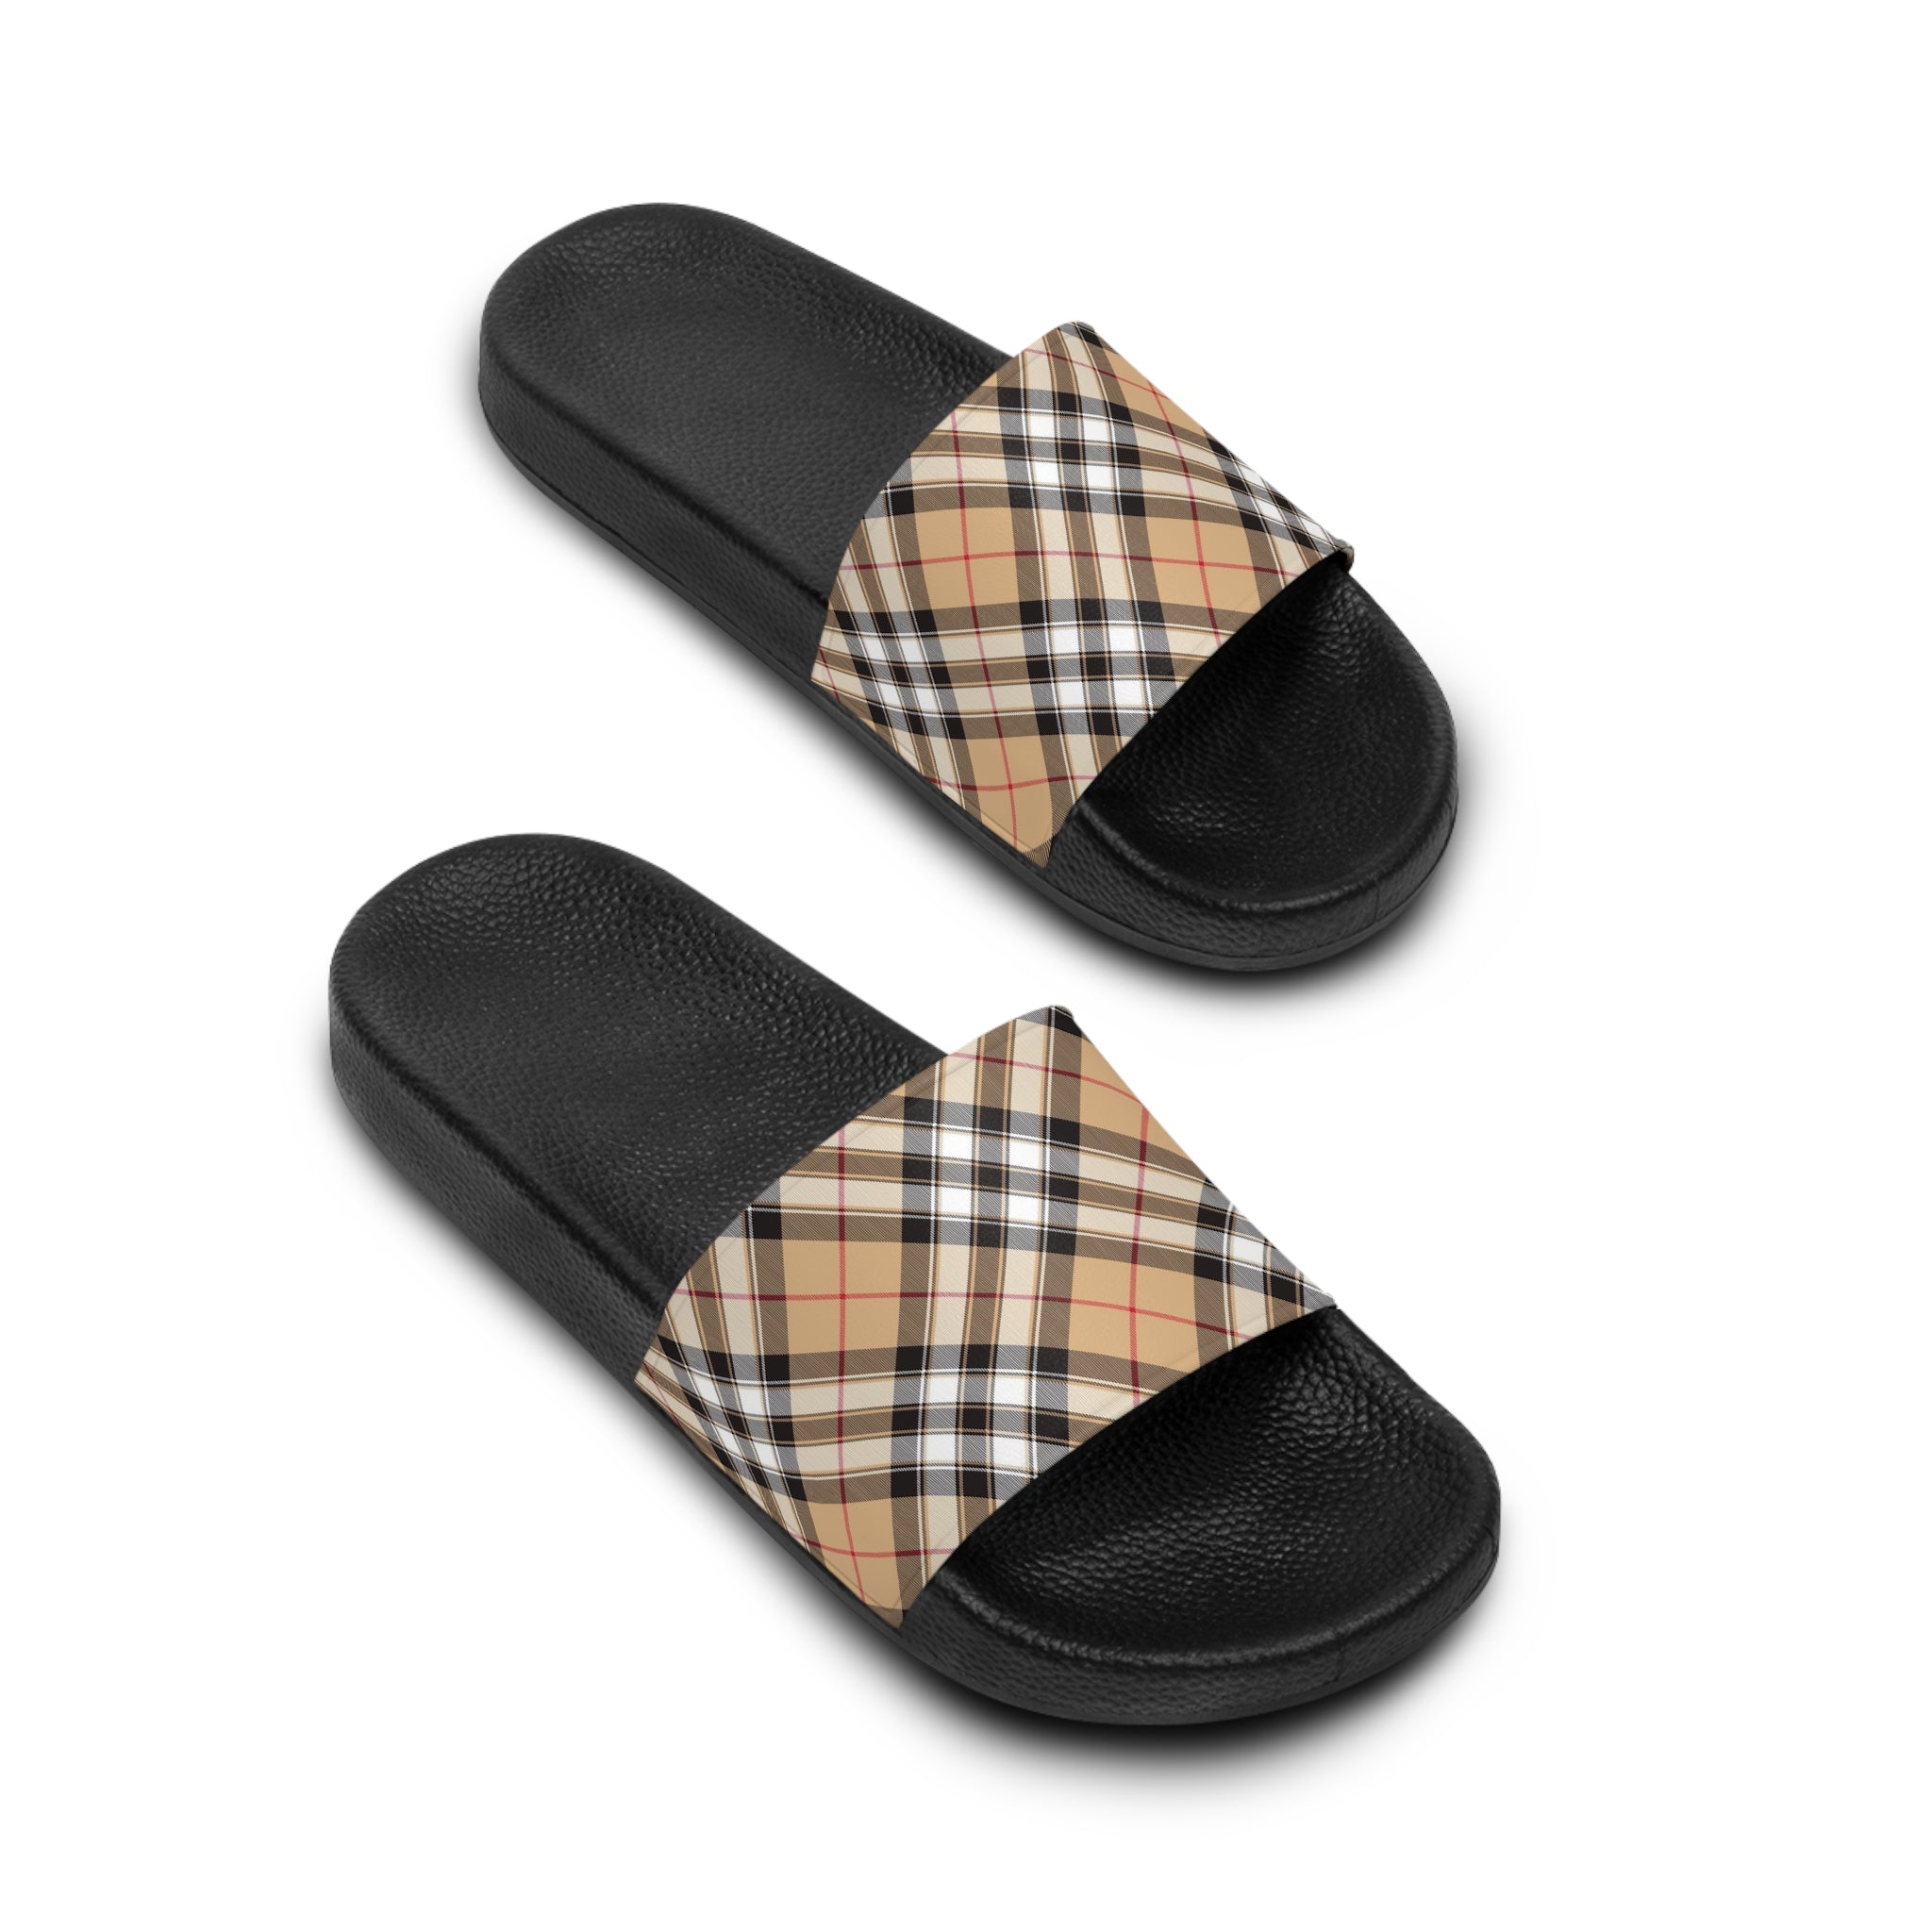  Casual Wear Collection in Plaid (Red Stripe) Women's Slide Sandals, Slide Sandals for Women, Plaid Slip Ons Sandals